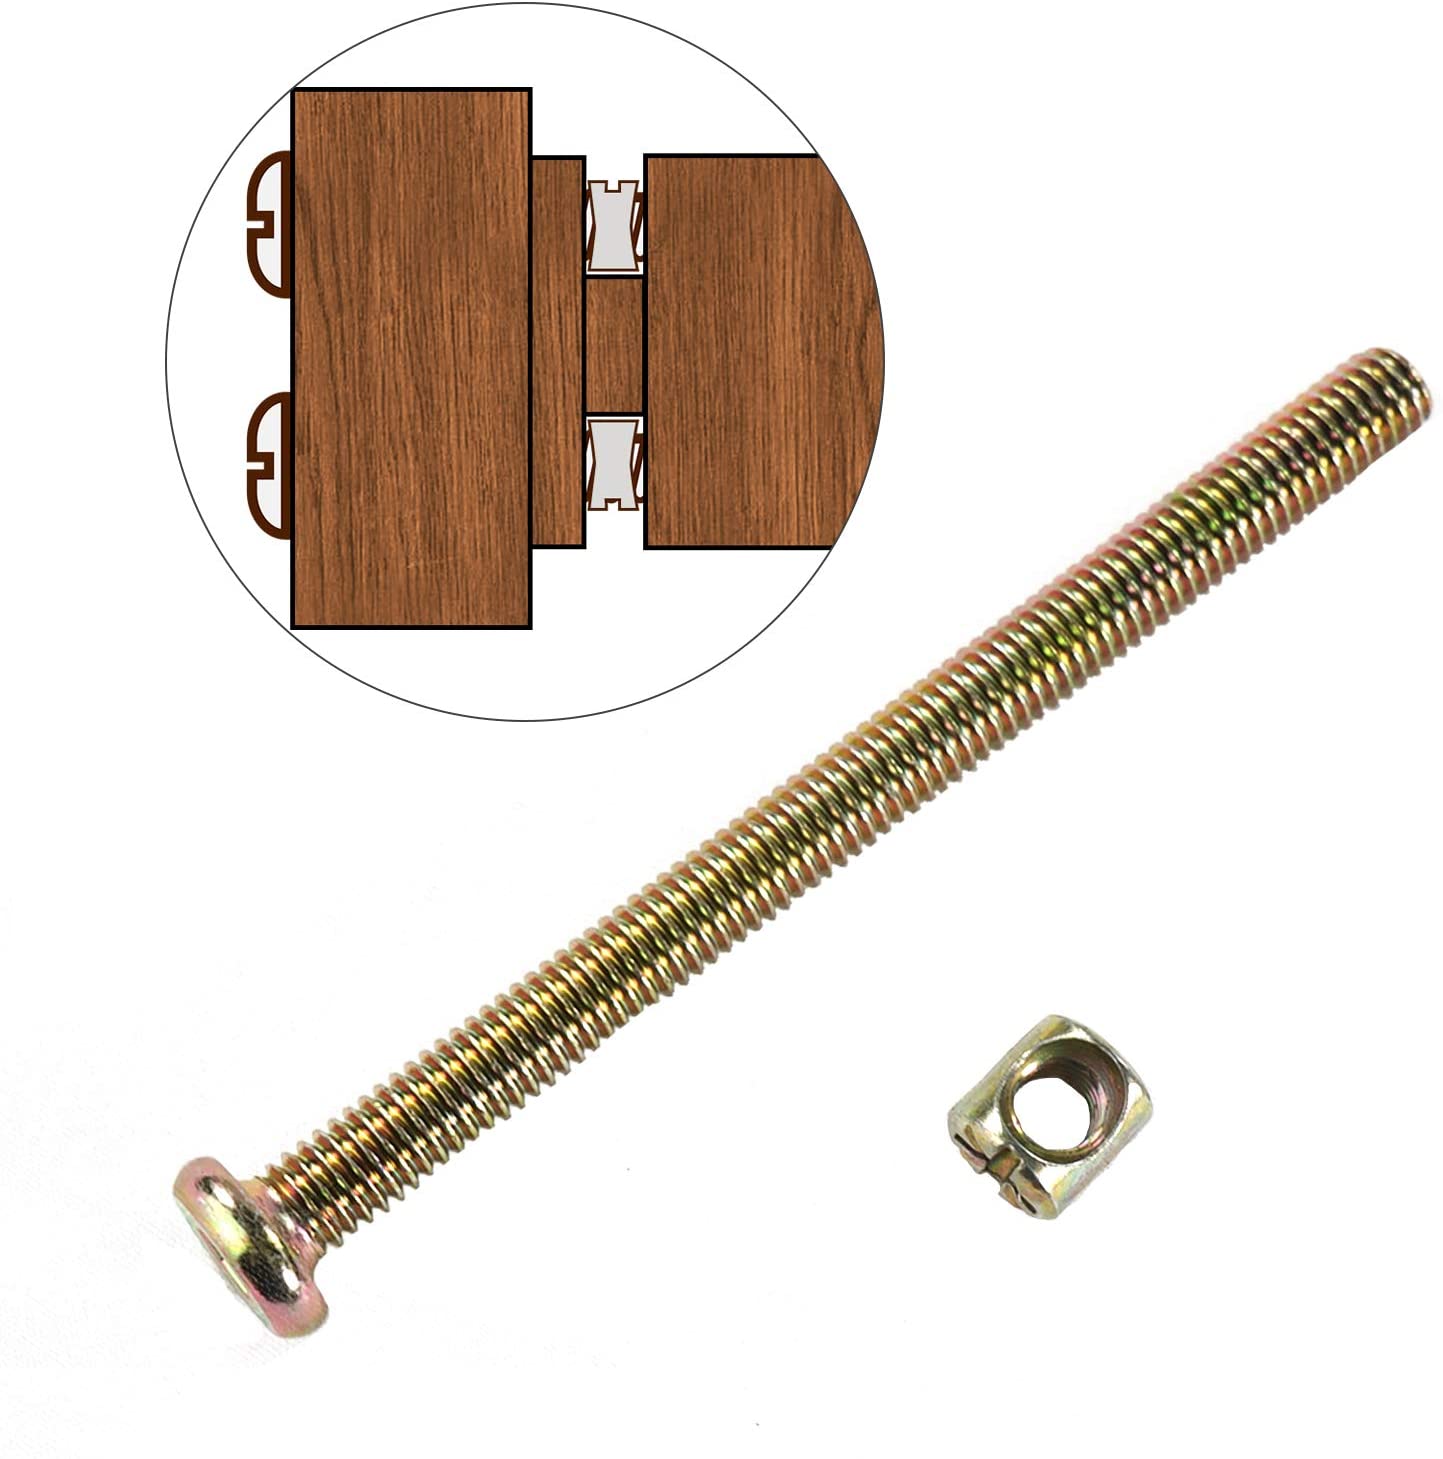 Crib Screws Hardware Replacement kit, M6 Furniture Bolt and Nuts, Hex  Socket Head Nuts for Crib Cot Bunk Baby Beds Chairs